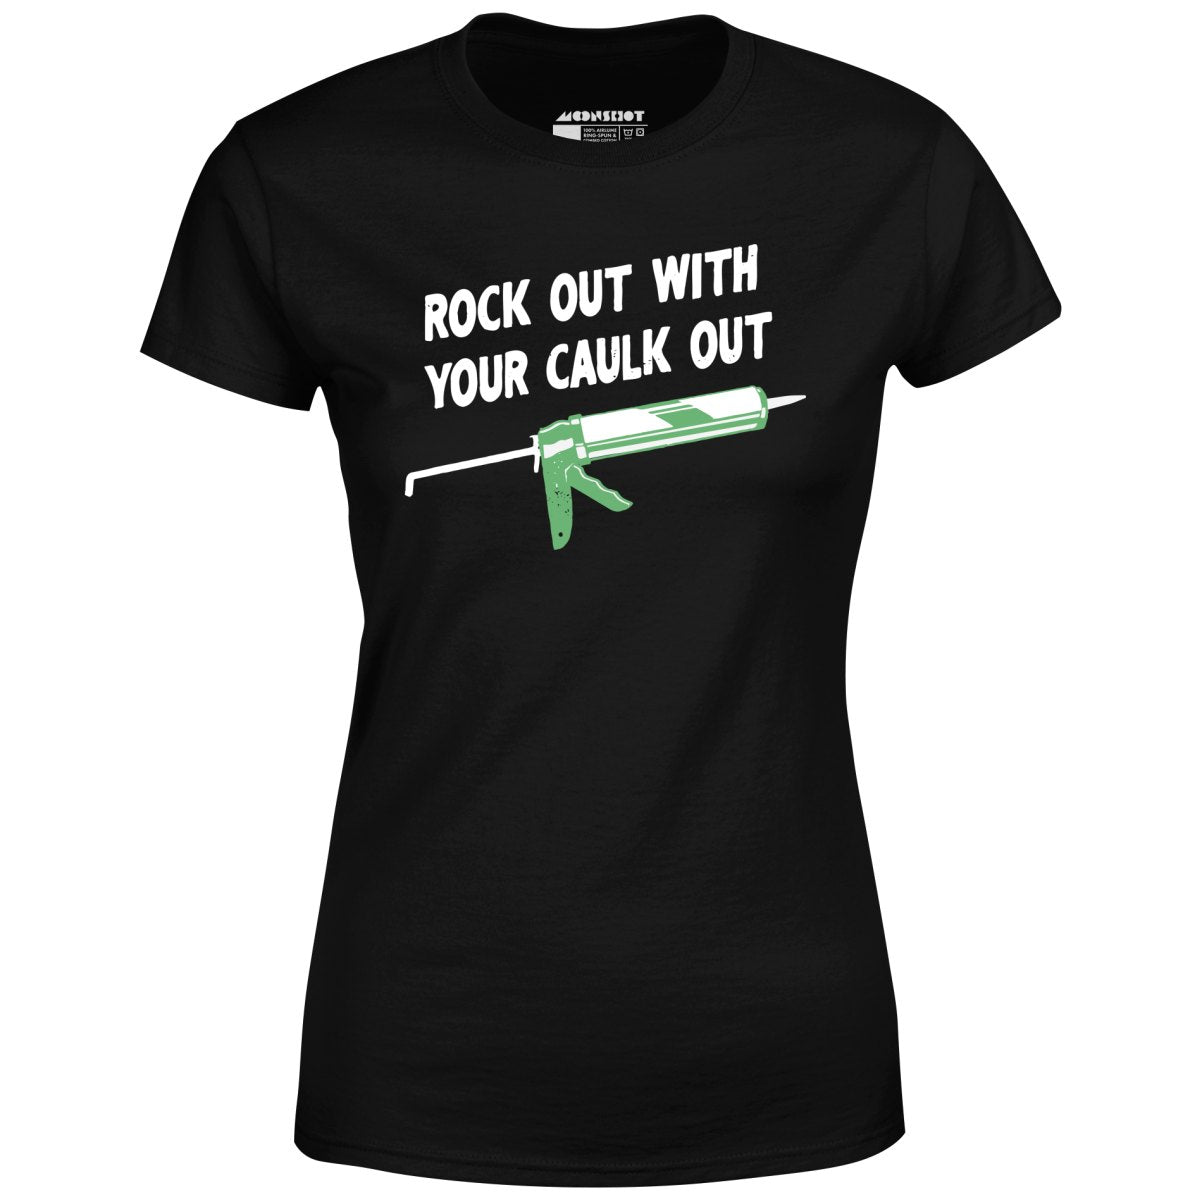 Rock Out With Your Caulk Out - Women's T-Shirt